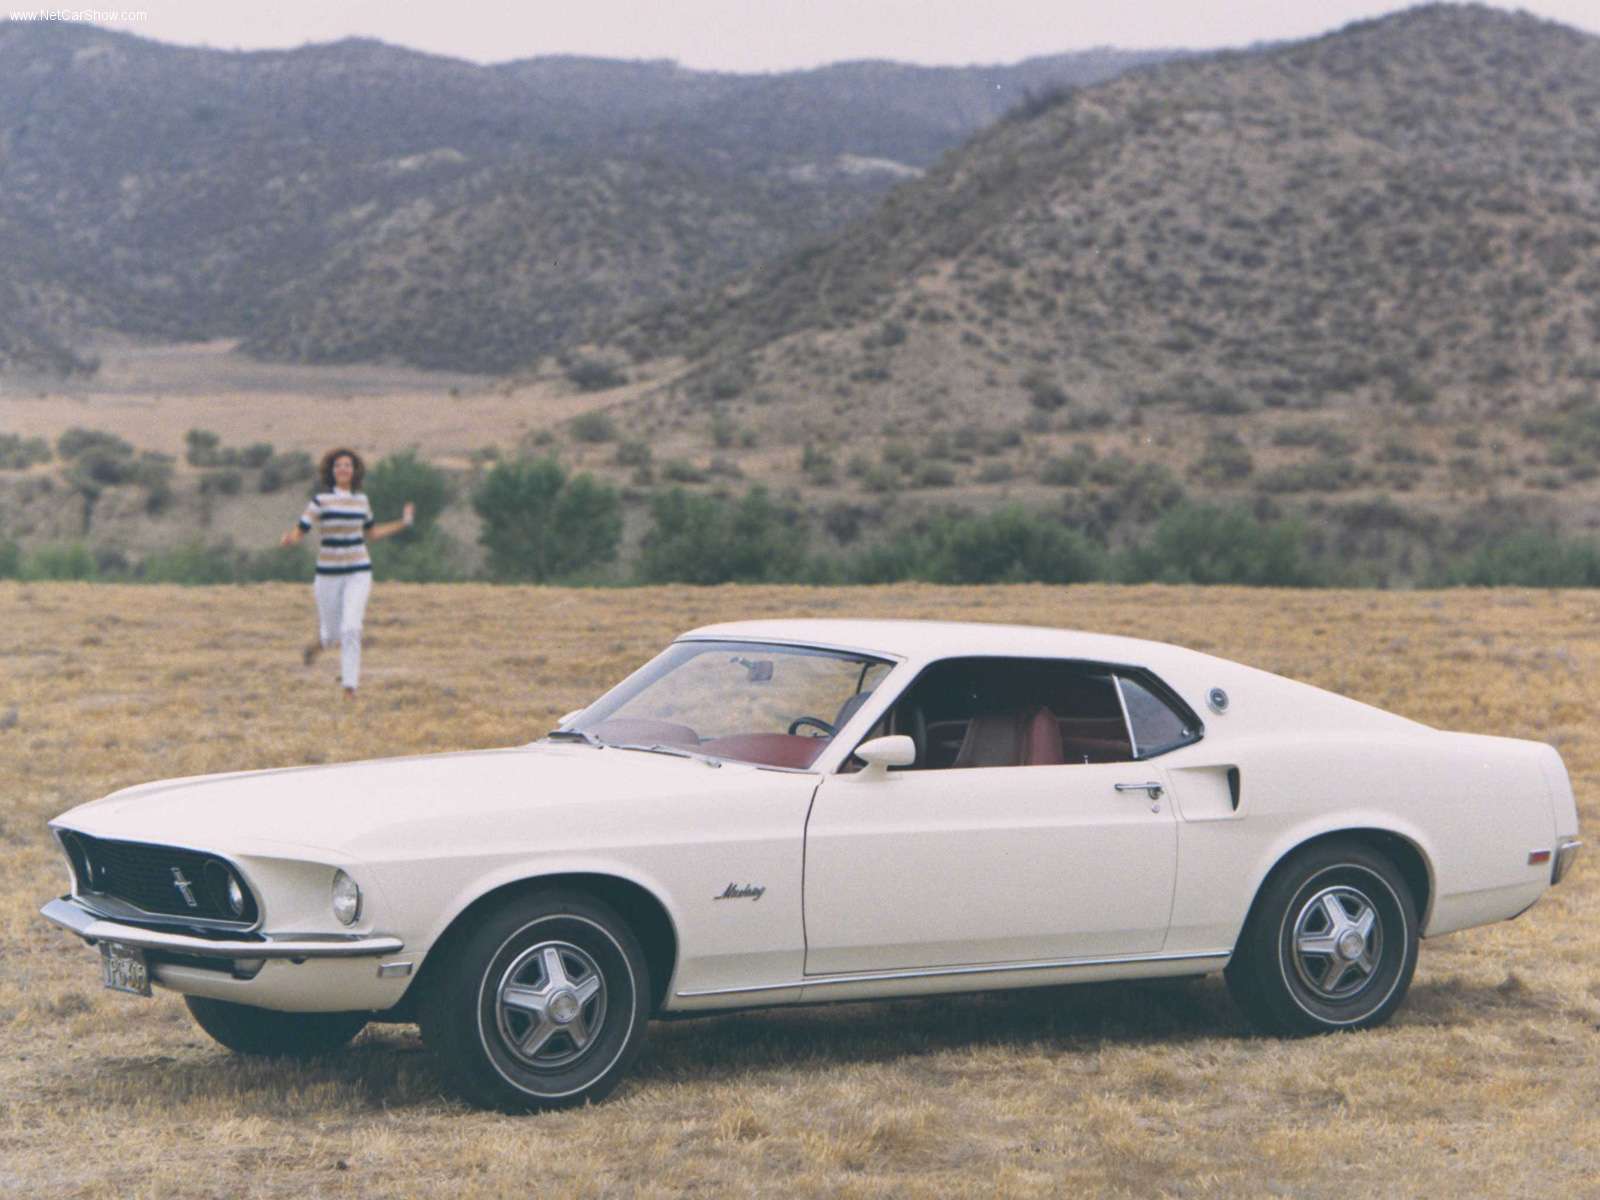 1969 Ford Mustang E